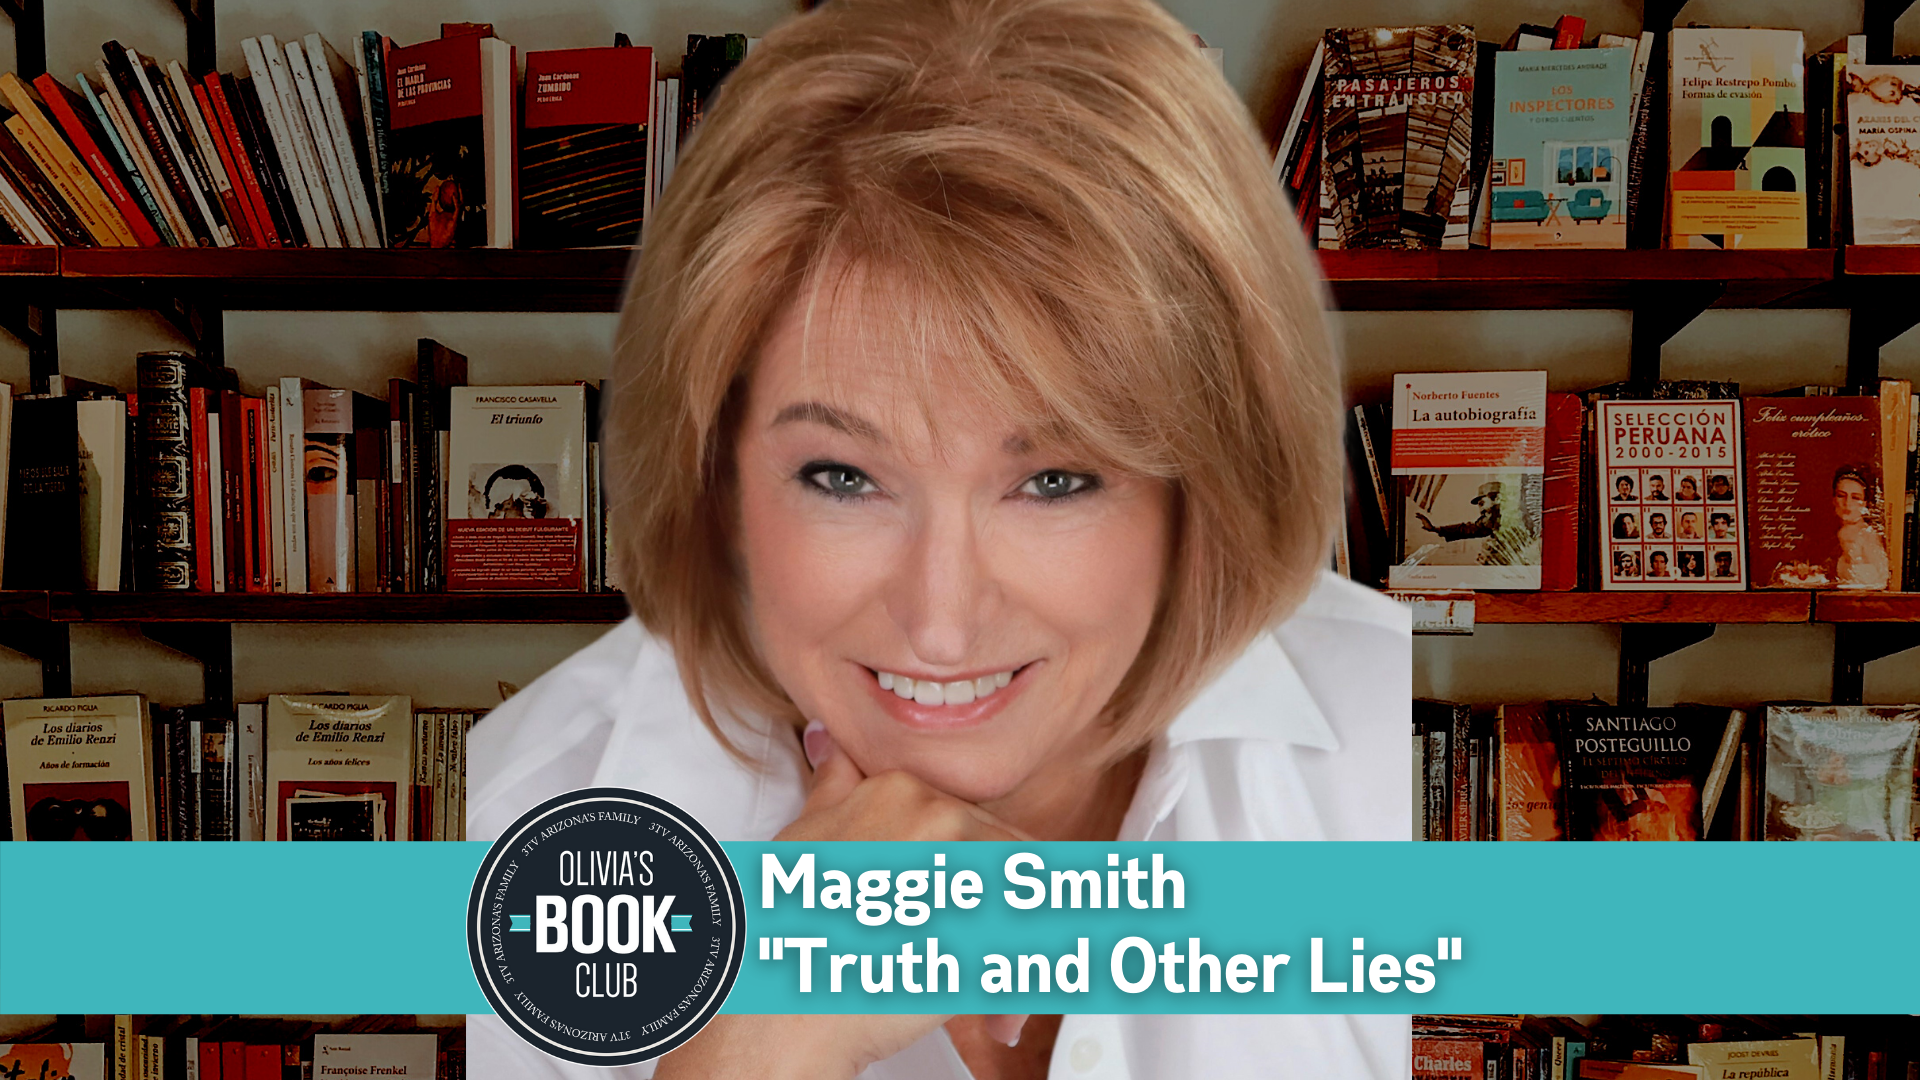 Olivias Book Club Maggie Smith, Truth and Other Lies